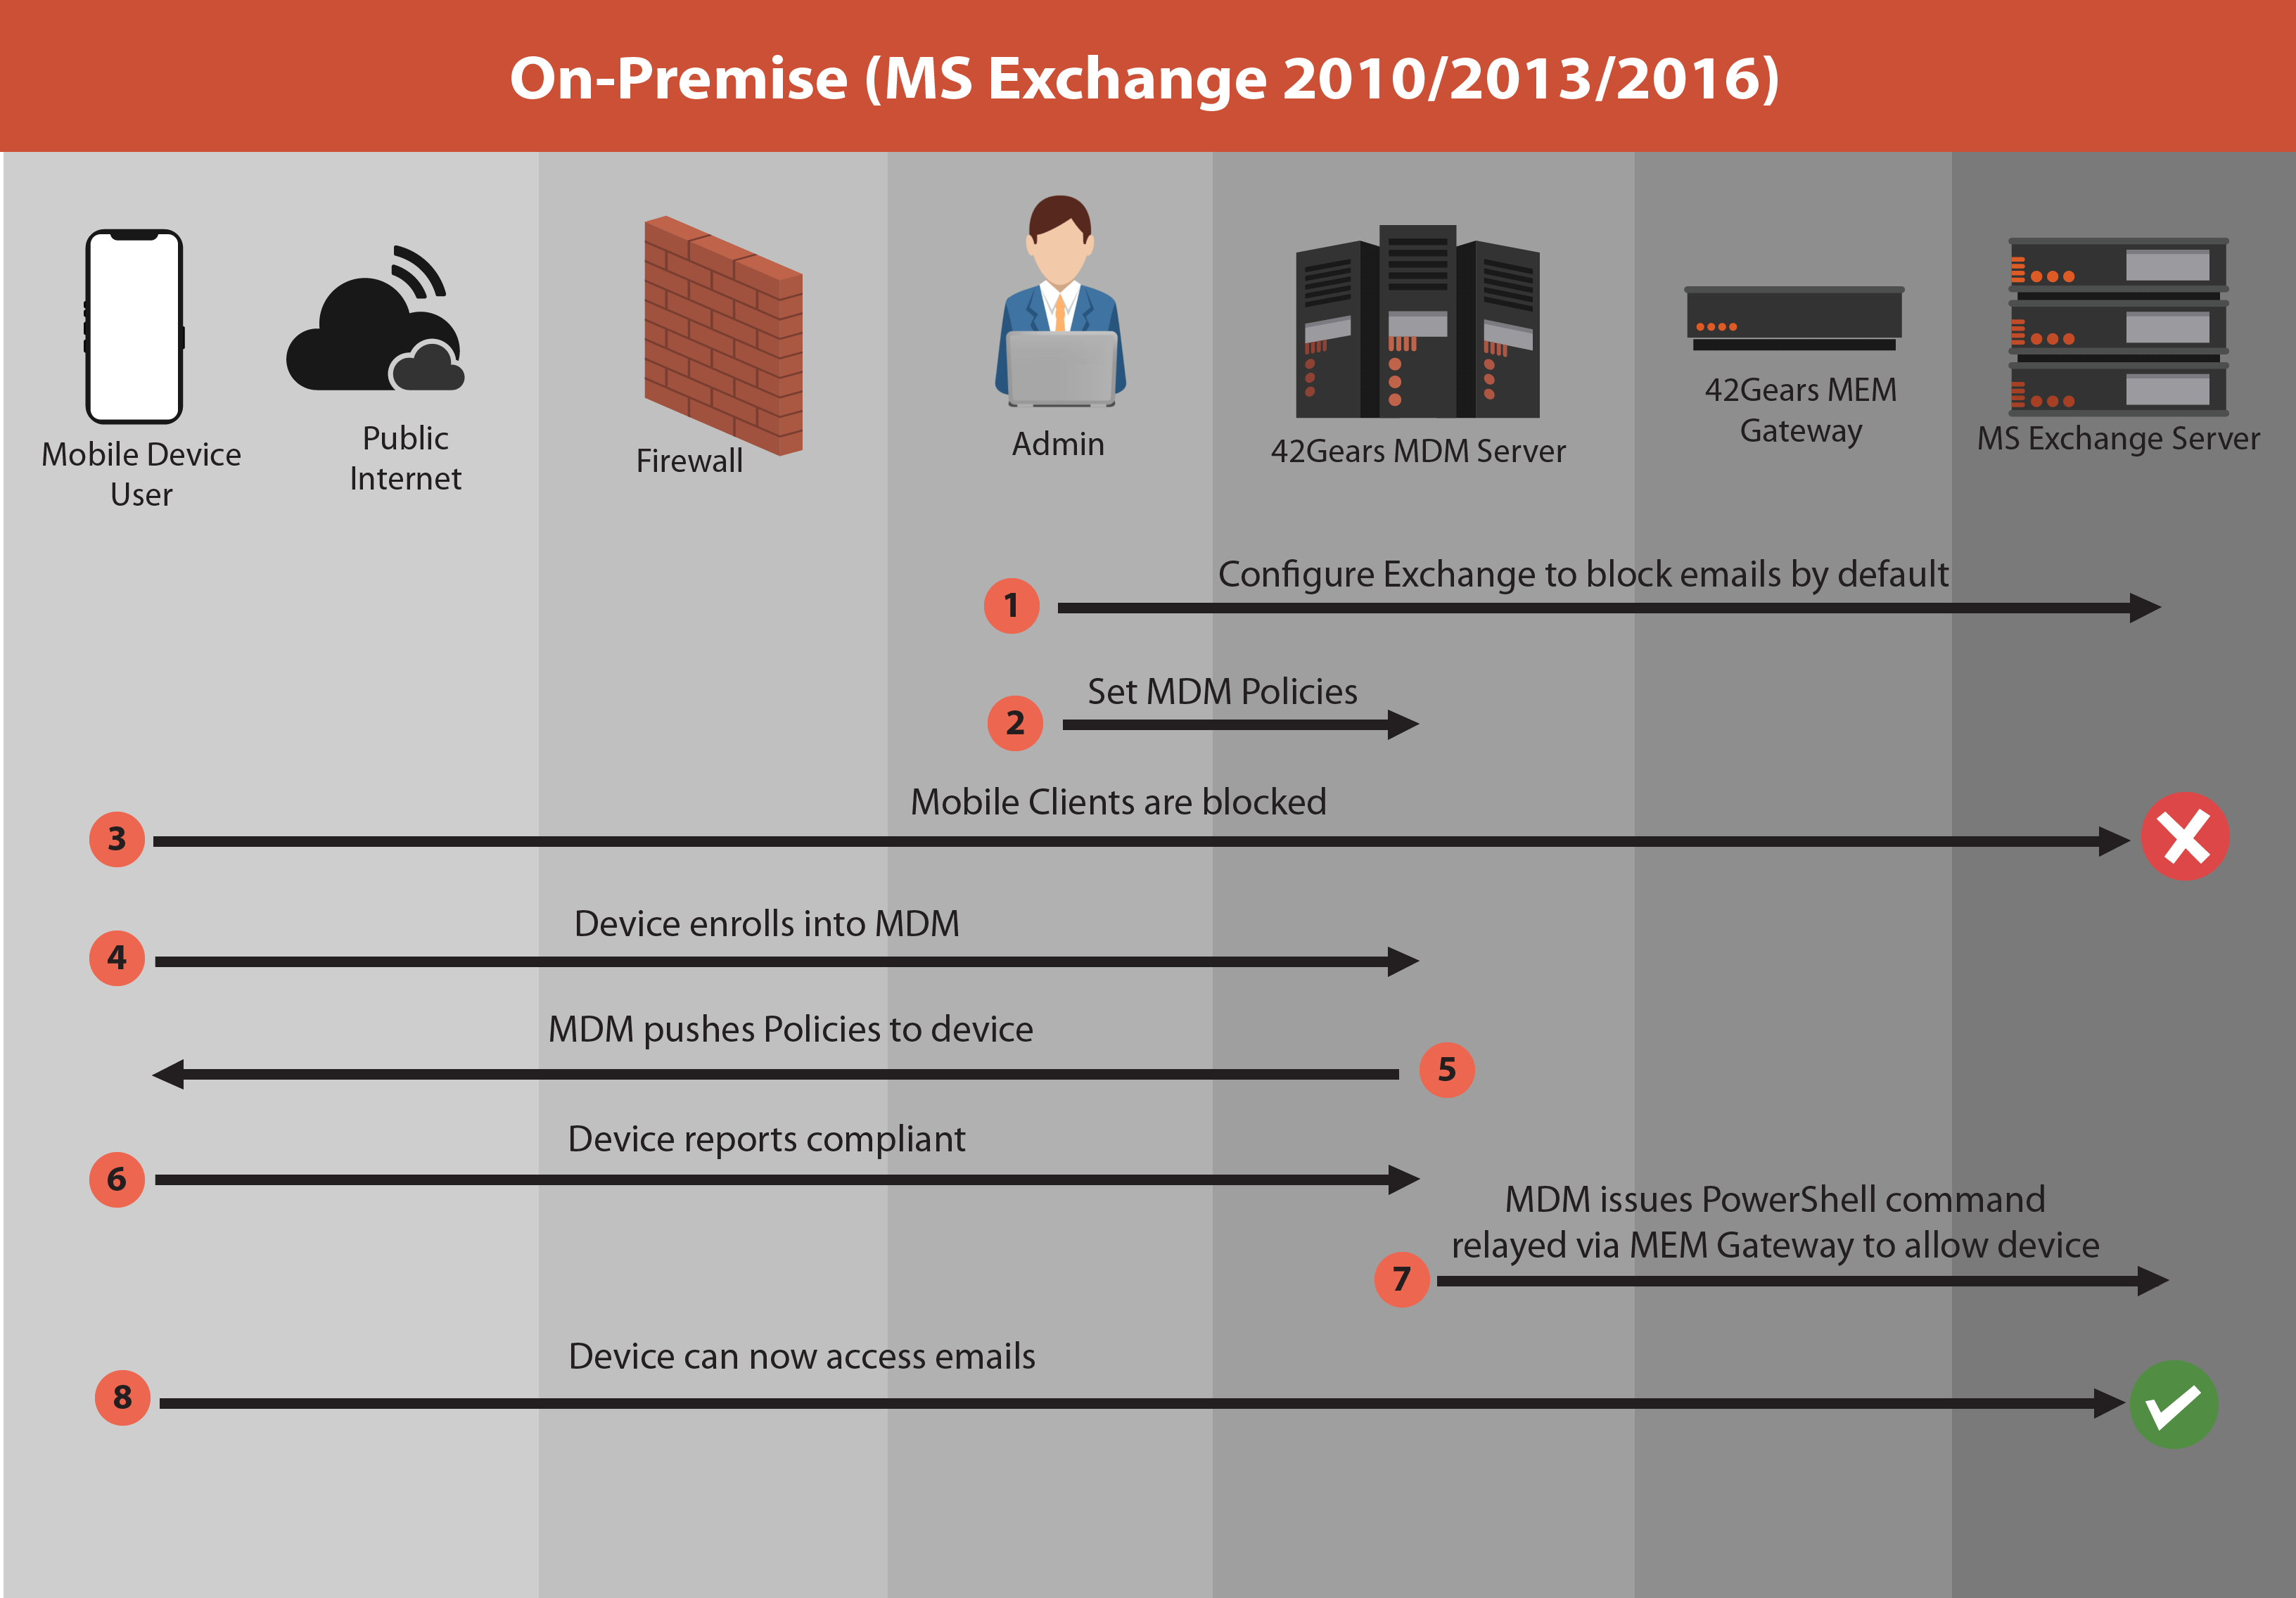 42Gears Mobile Email Management - On Premise Exchange